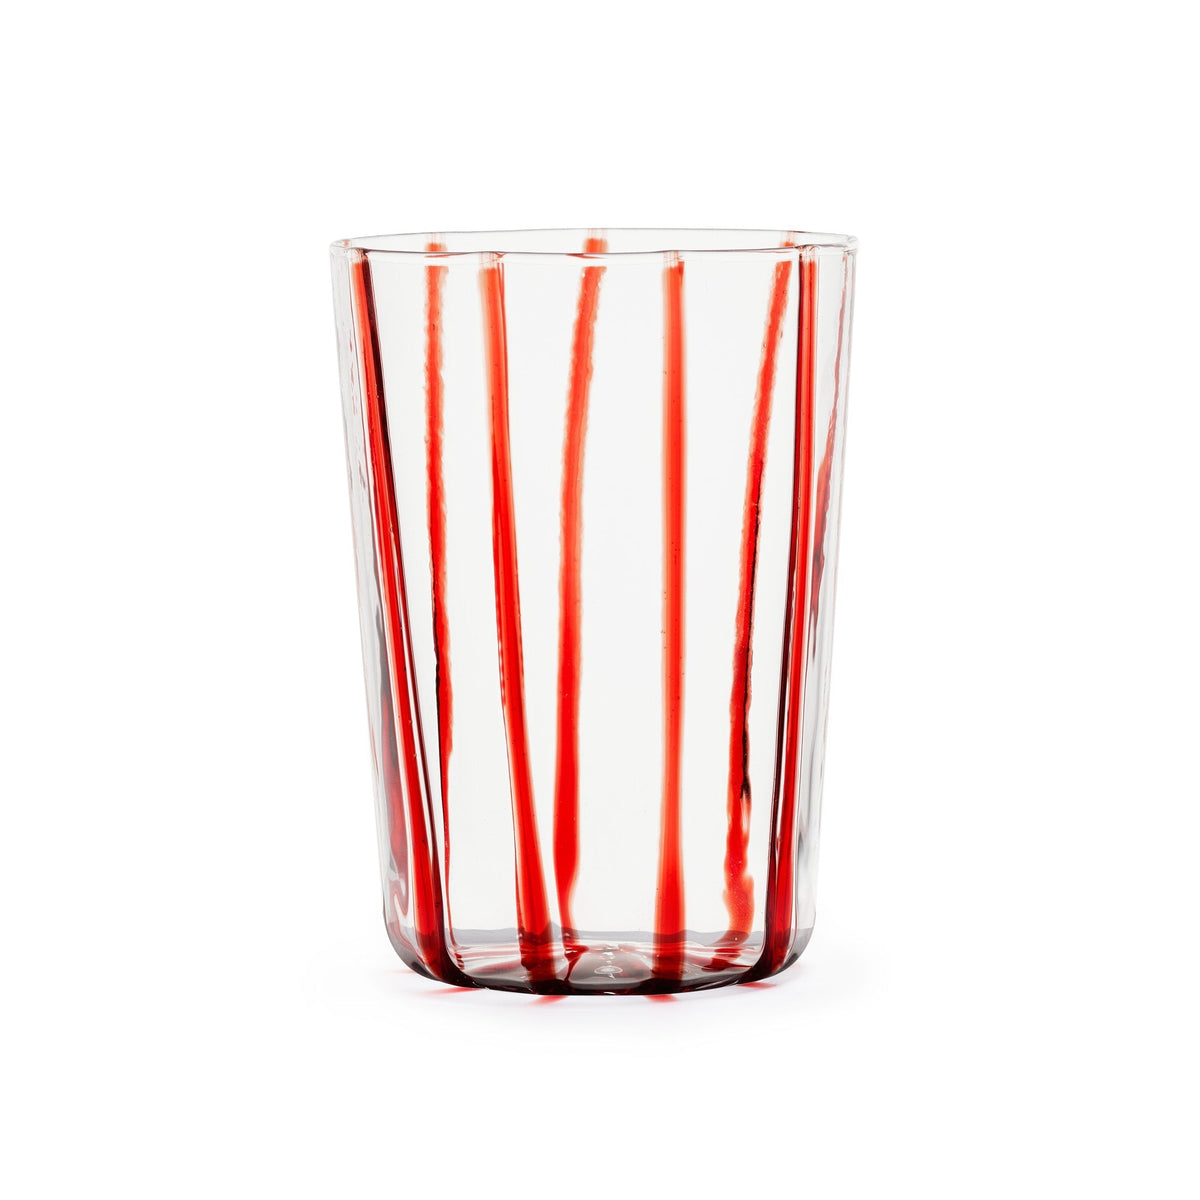 Locchi_glass_lines_red